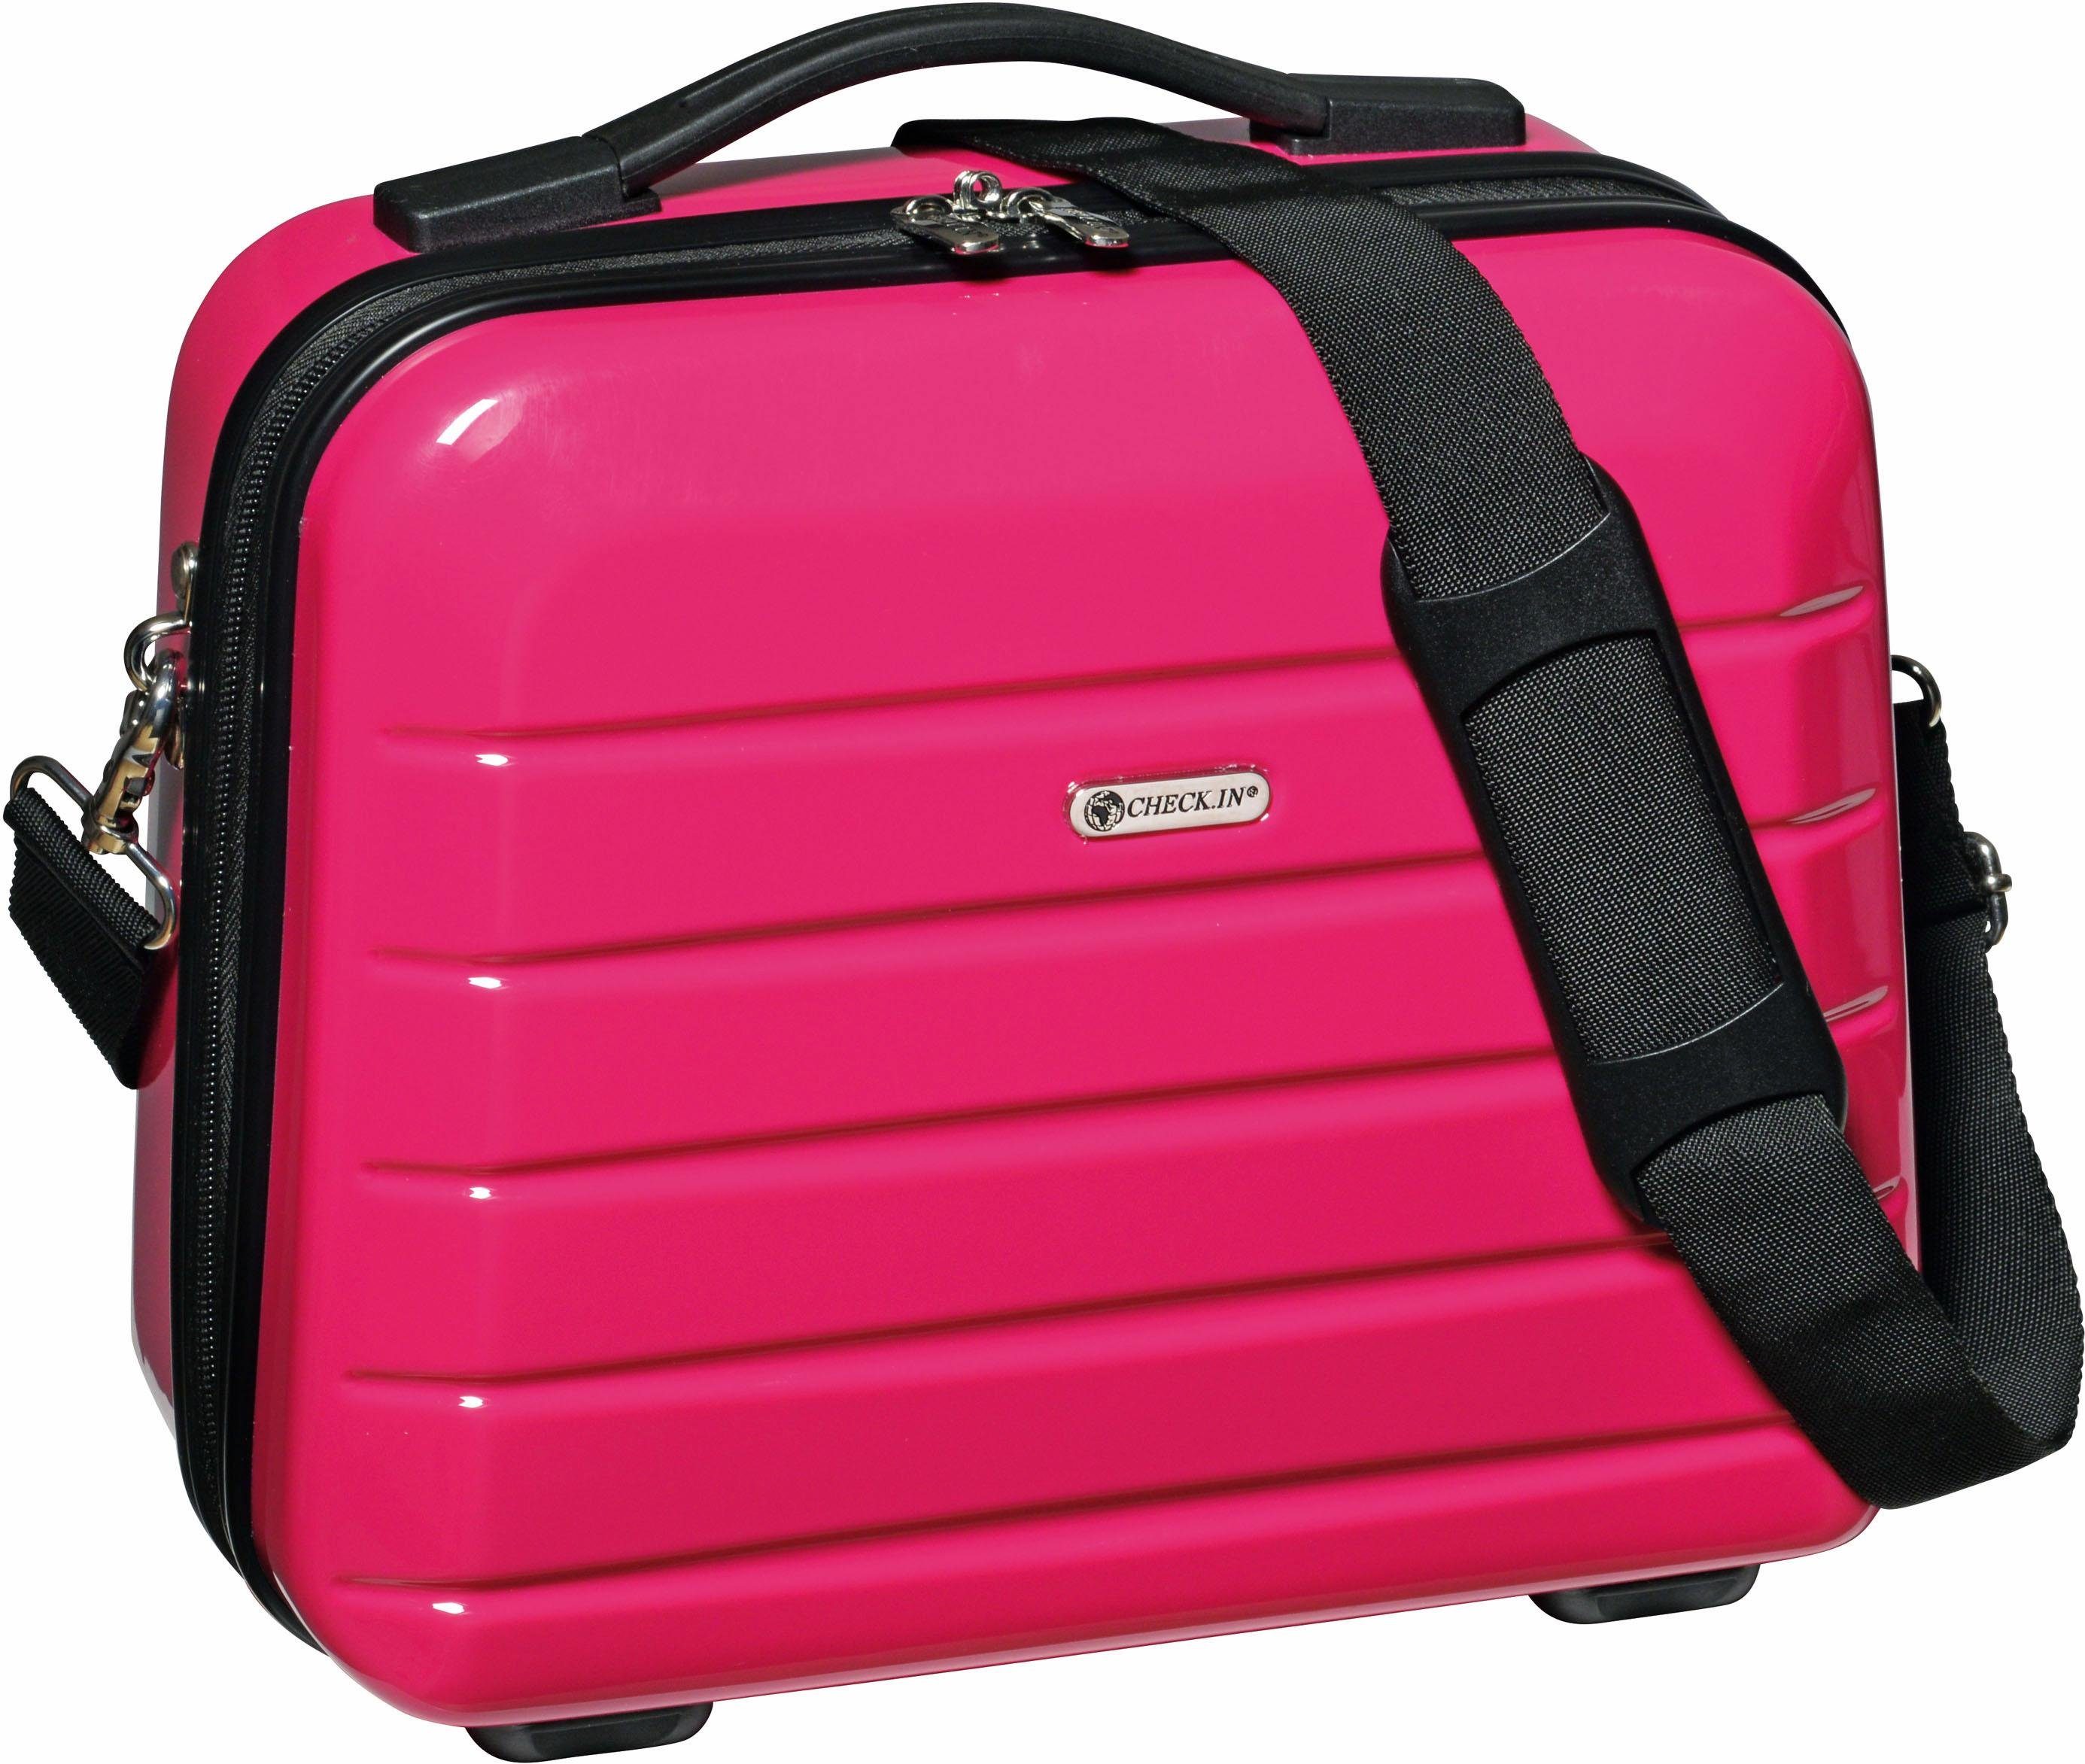 CHECK.IN® London 2.0 Beautycase pink